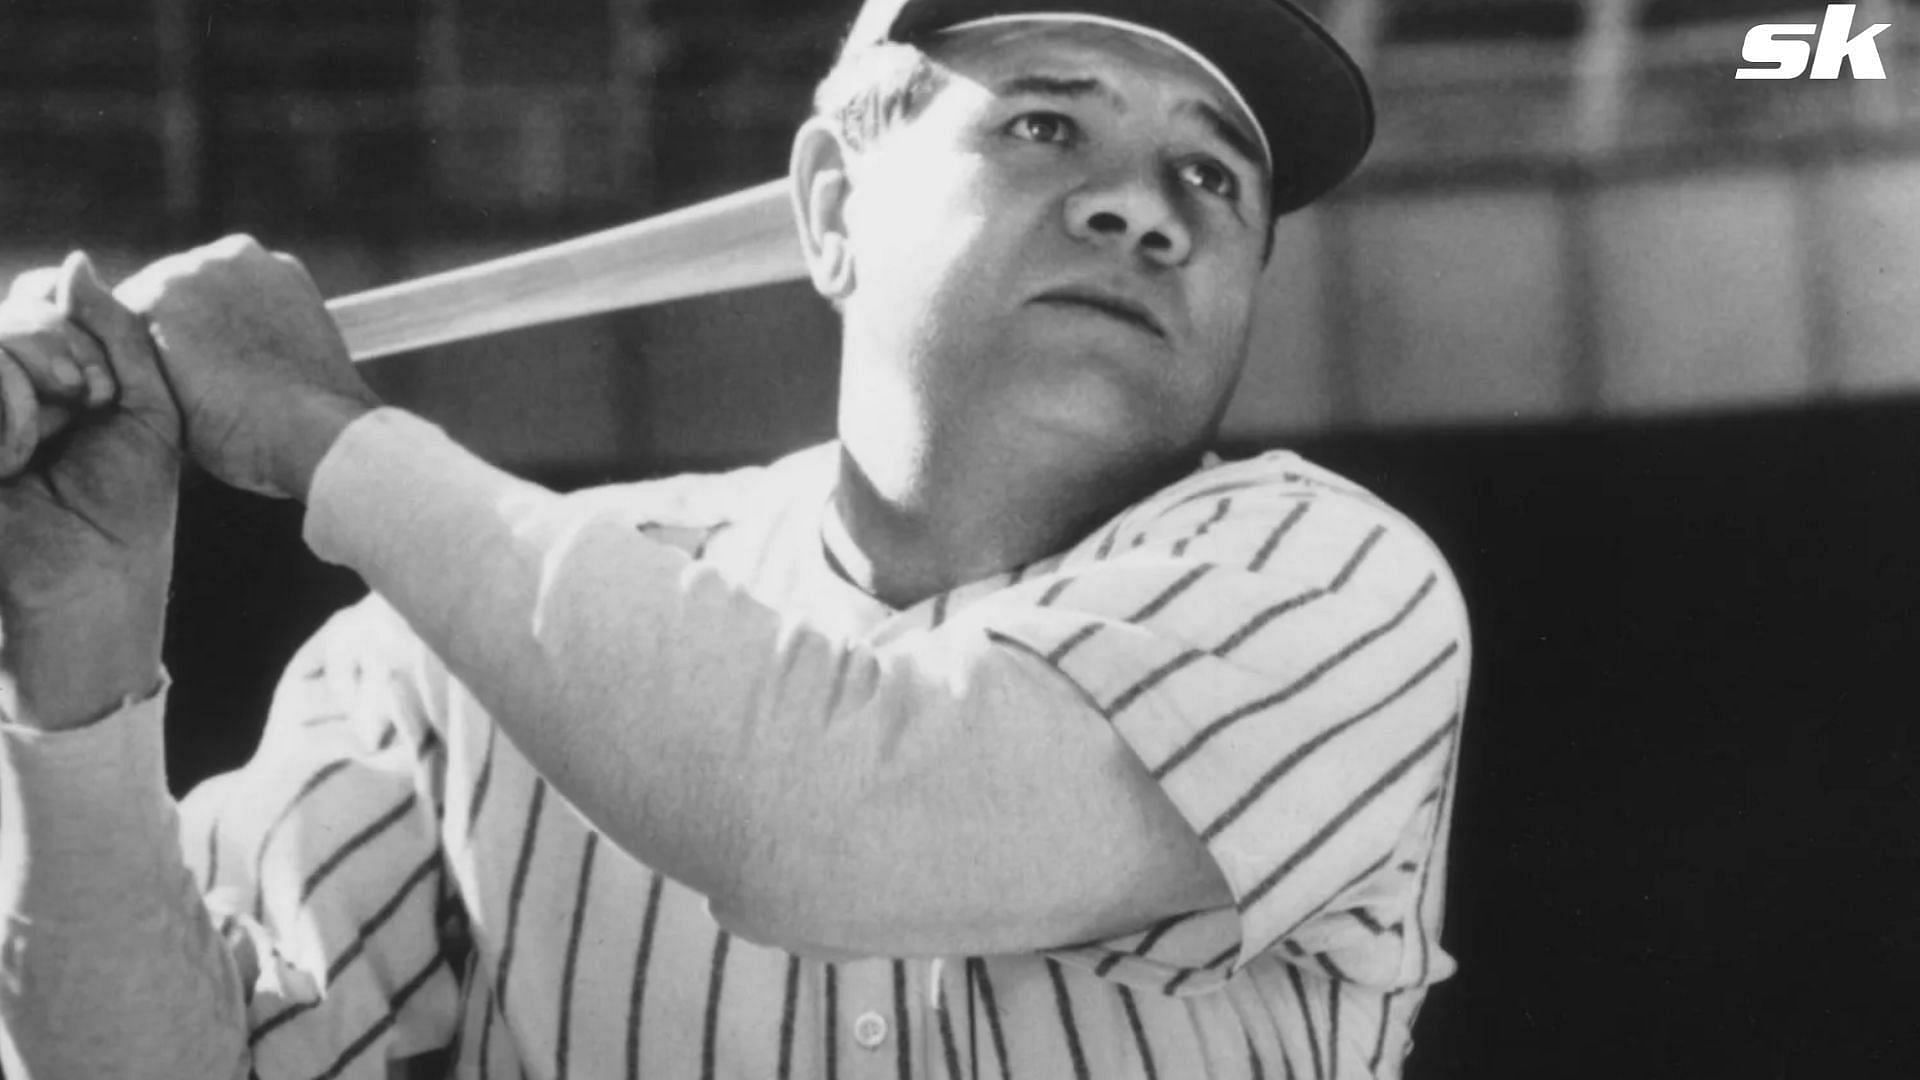 100+] Babe Ruth Wallpapers